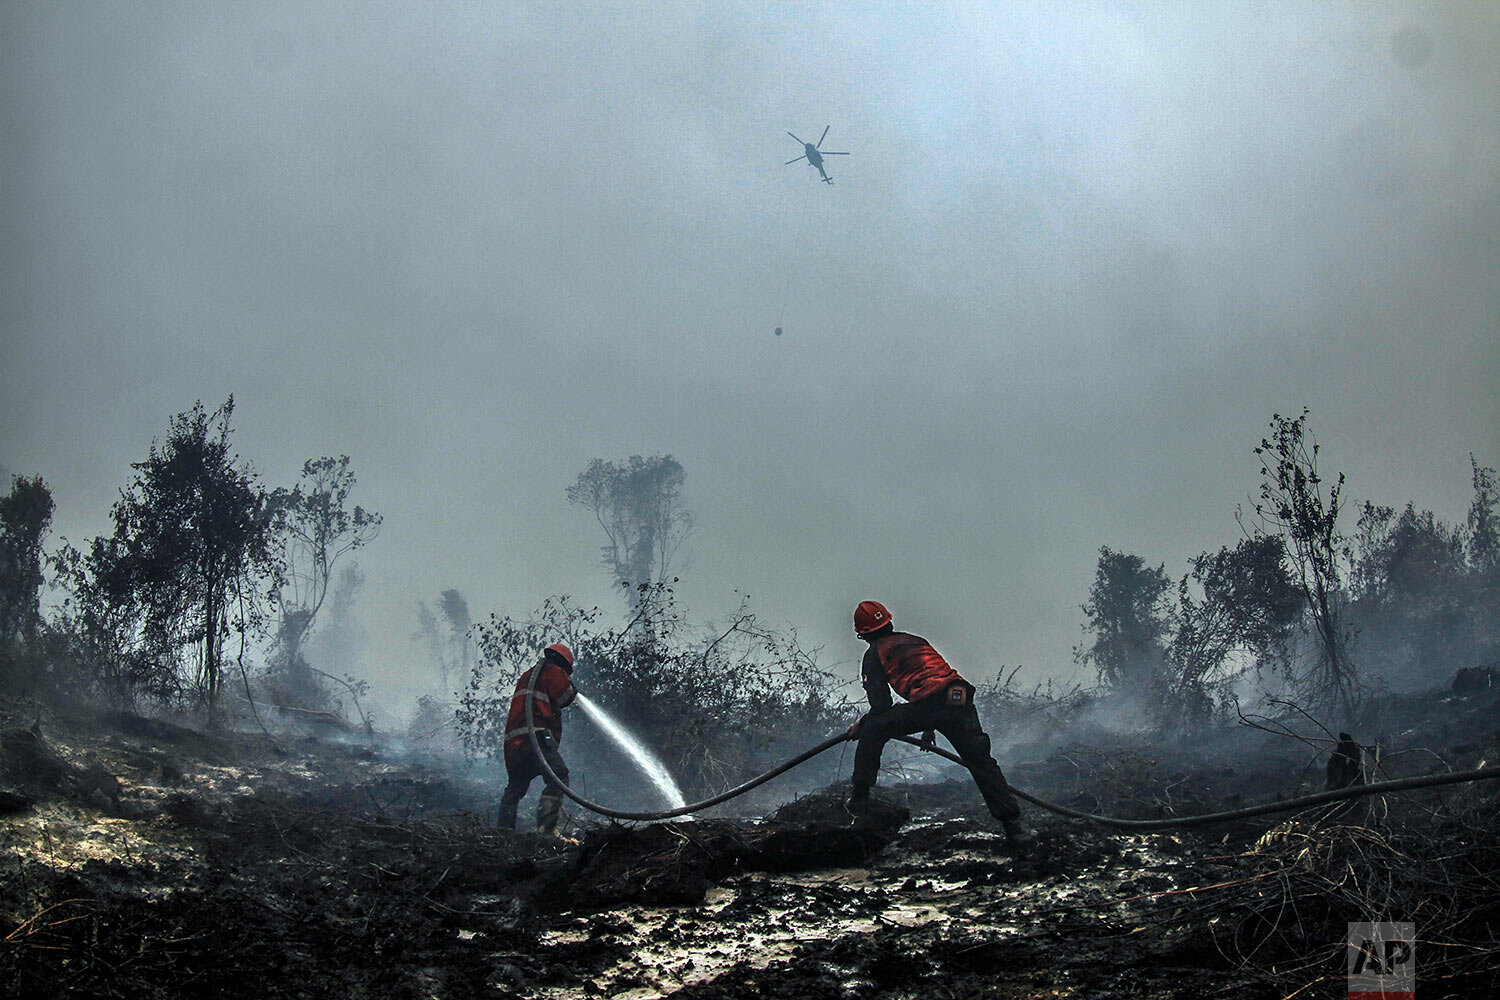  Firefighters spray water on the embers of a forest fire in Kampar, Riau province, Indonesia, Wednesday, Sept. 18, 2019. Fires have razed hundreds of thousands of hectares of land in Sumatra and Borneo island, spreading a thick, noxious haze around S